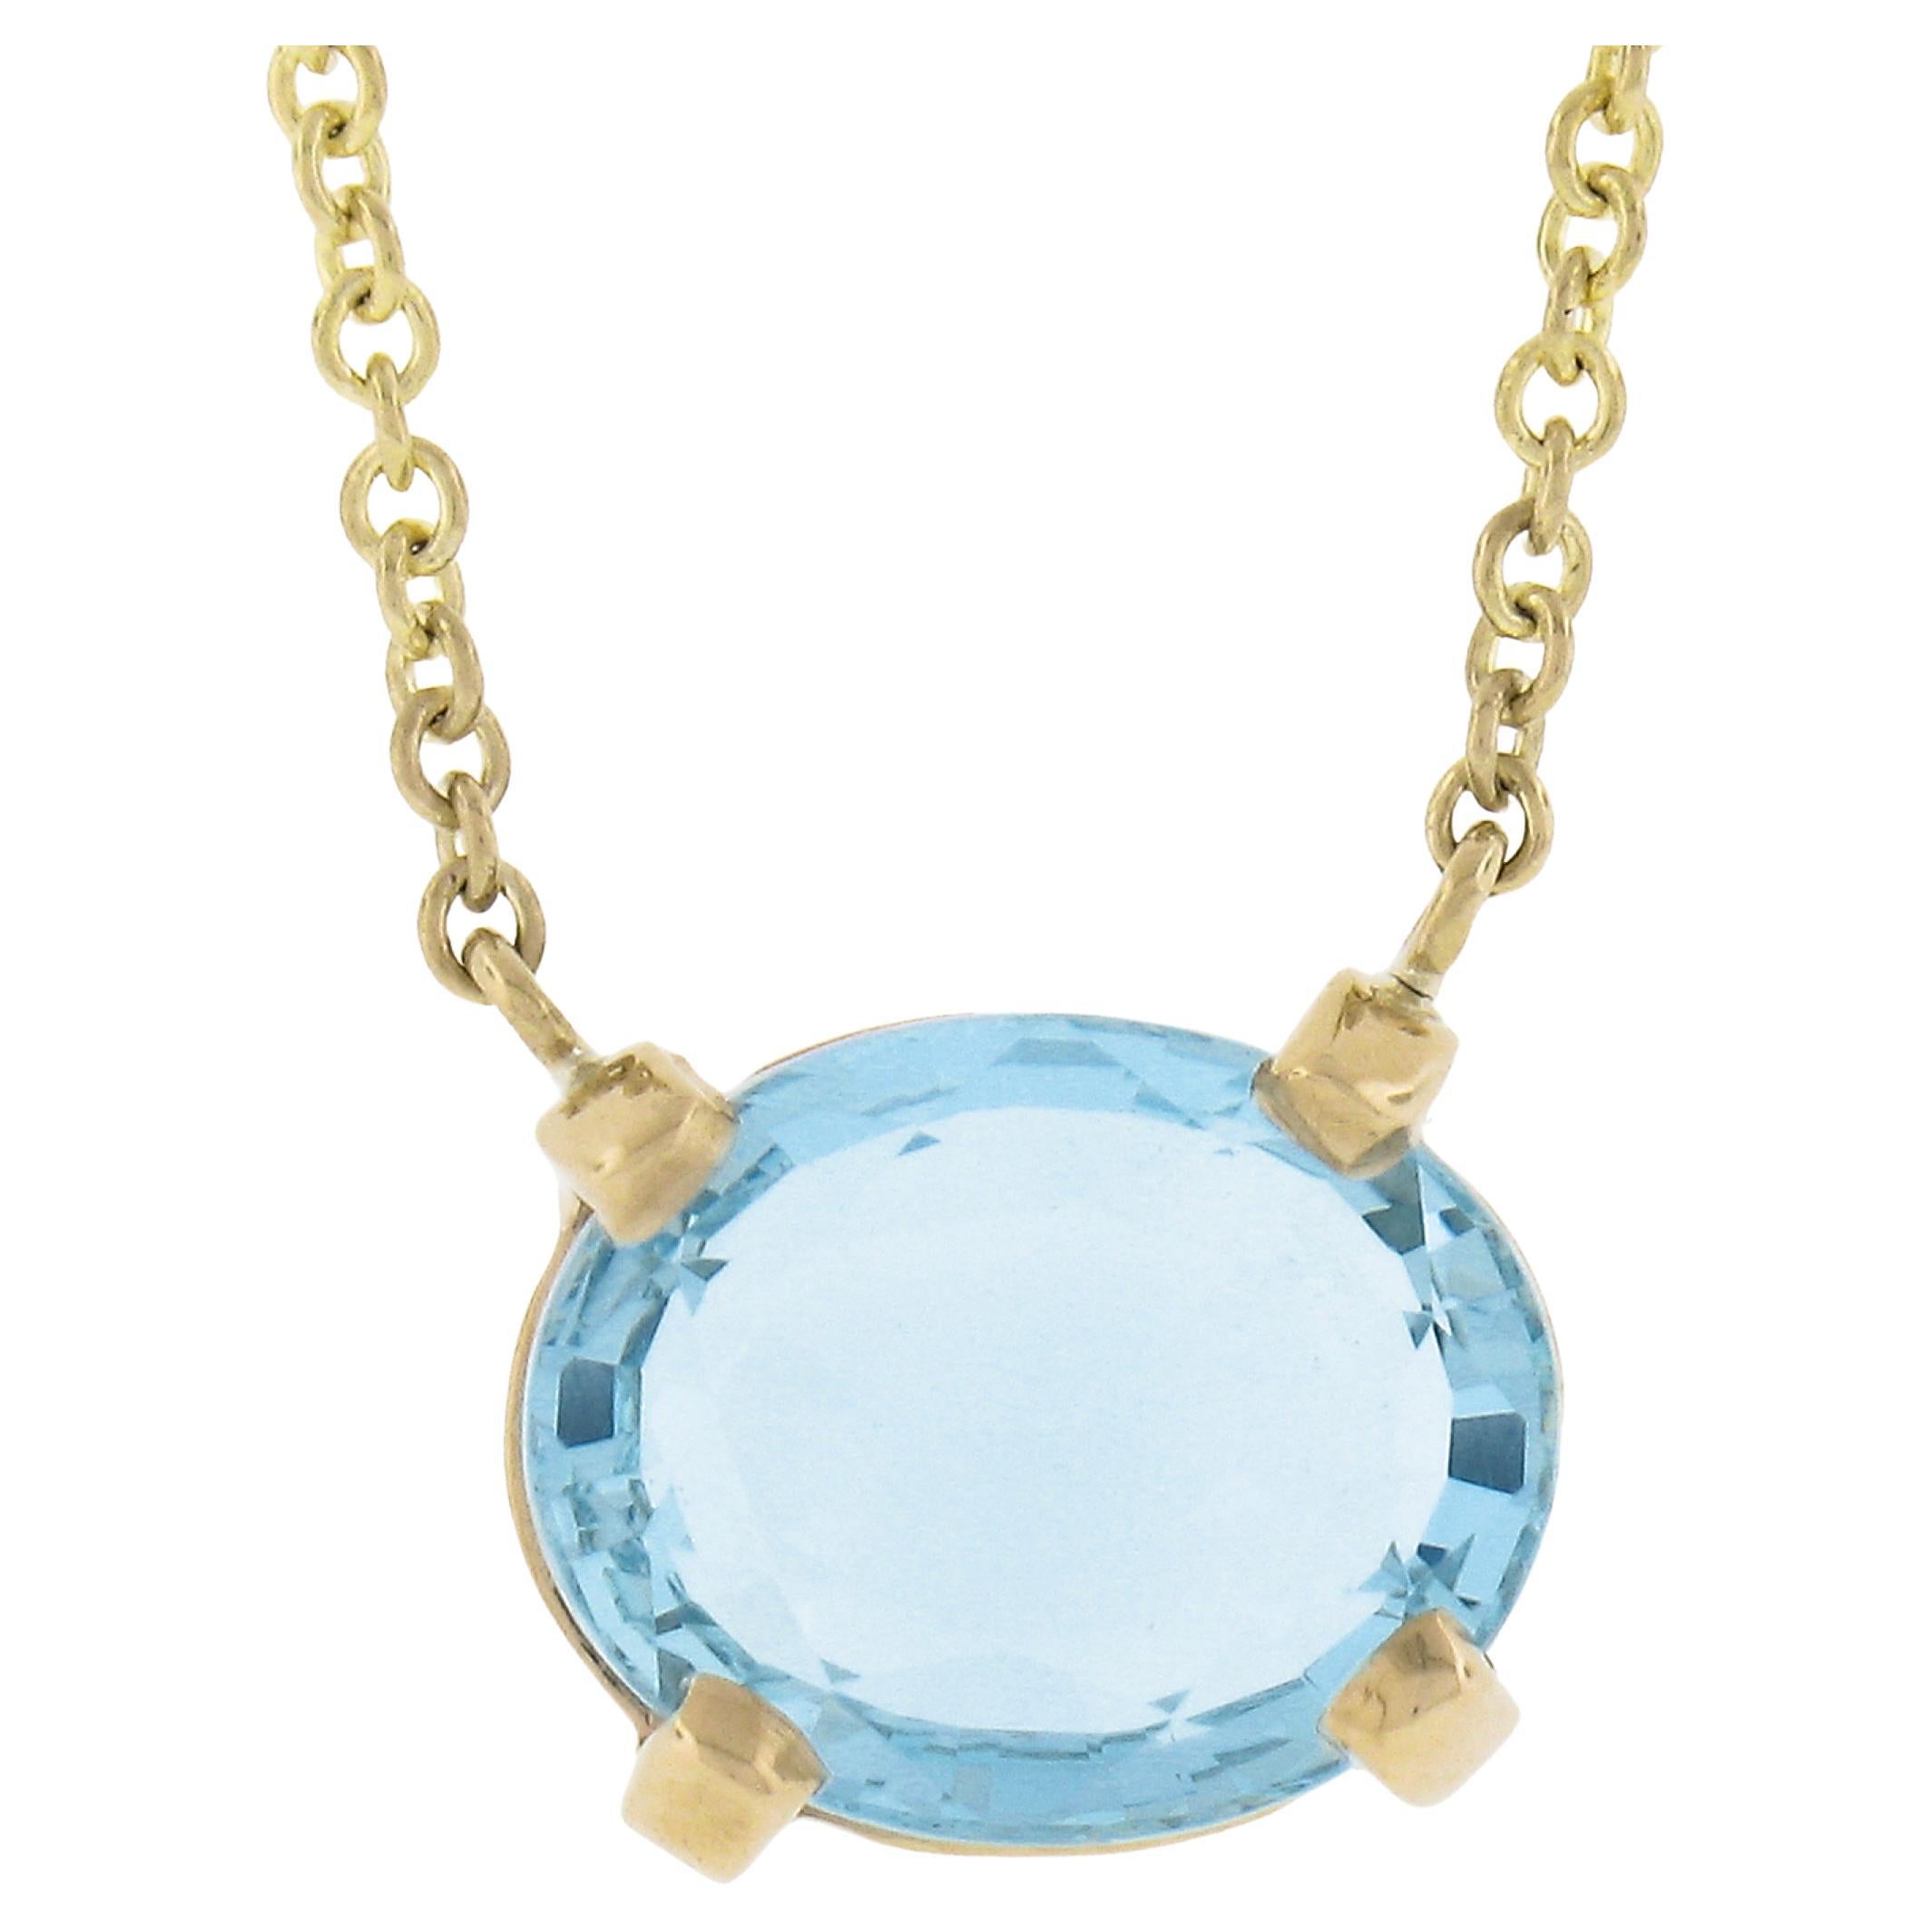 New 14k Yellow Gold 2.46ct Oval Aquamarine Pendant & 16" or 18" Adjustable Chain For Sale